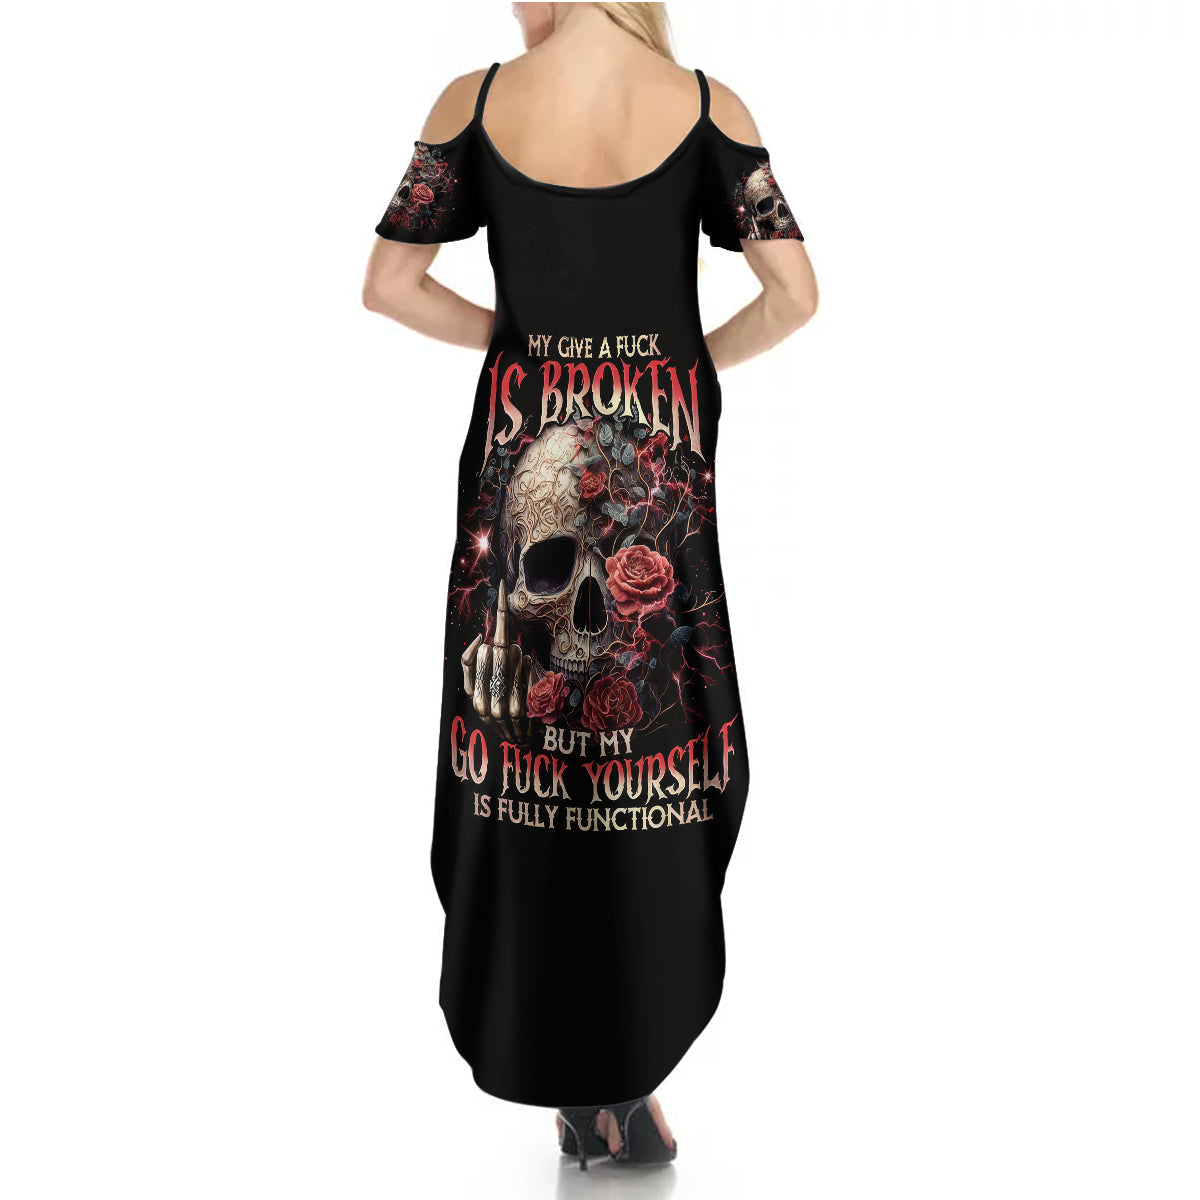 rose-skull-summer-maxi-dress-my-give-a-fuck-is-broken-but-my-go-fuck-yourself-is-functional